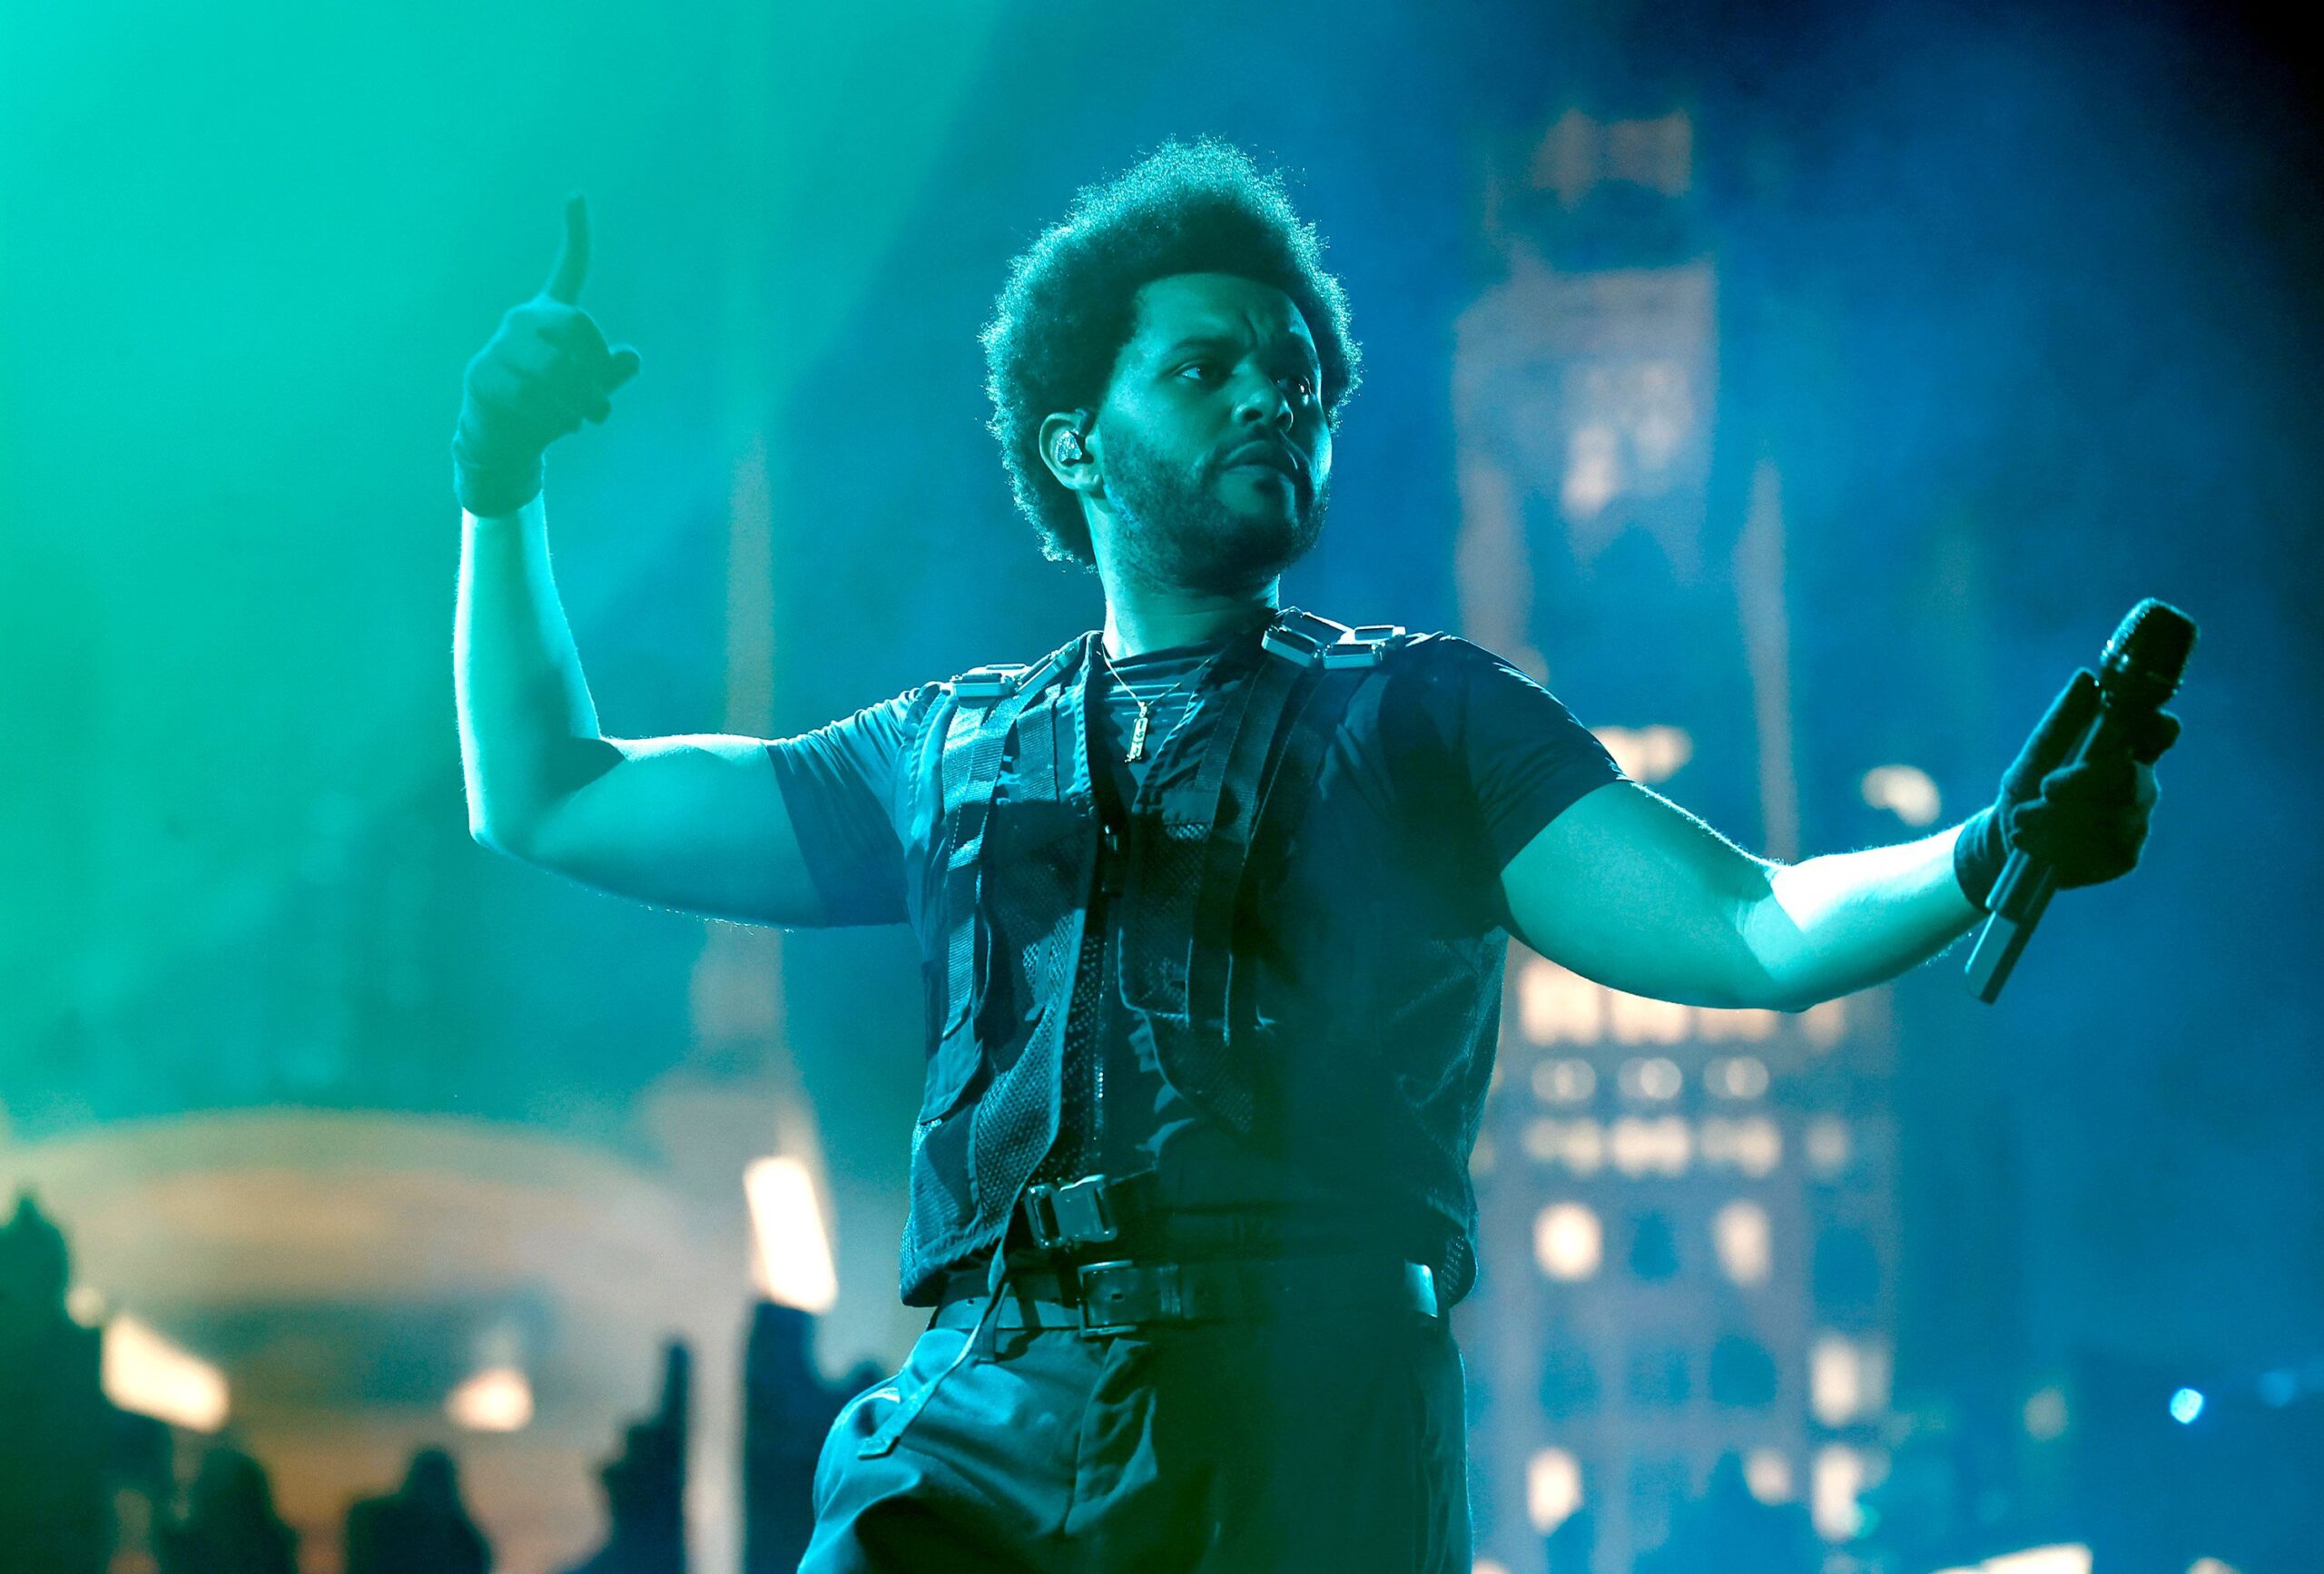 New Song By The Weeknd Debuts In "Avatar: The Way Of Water" Trailer